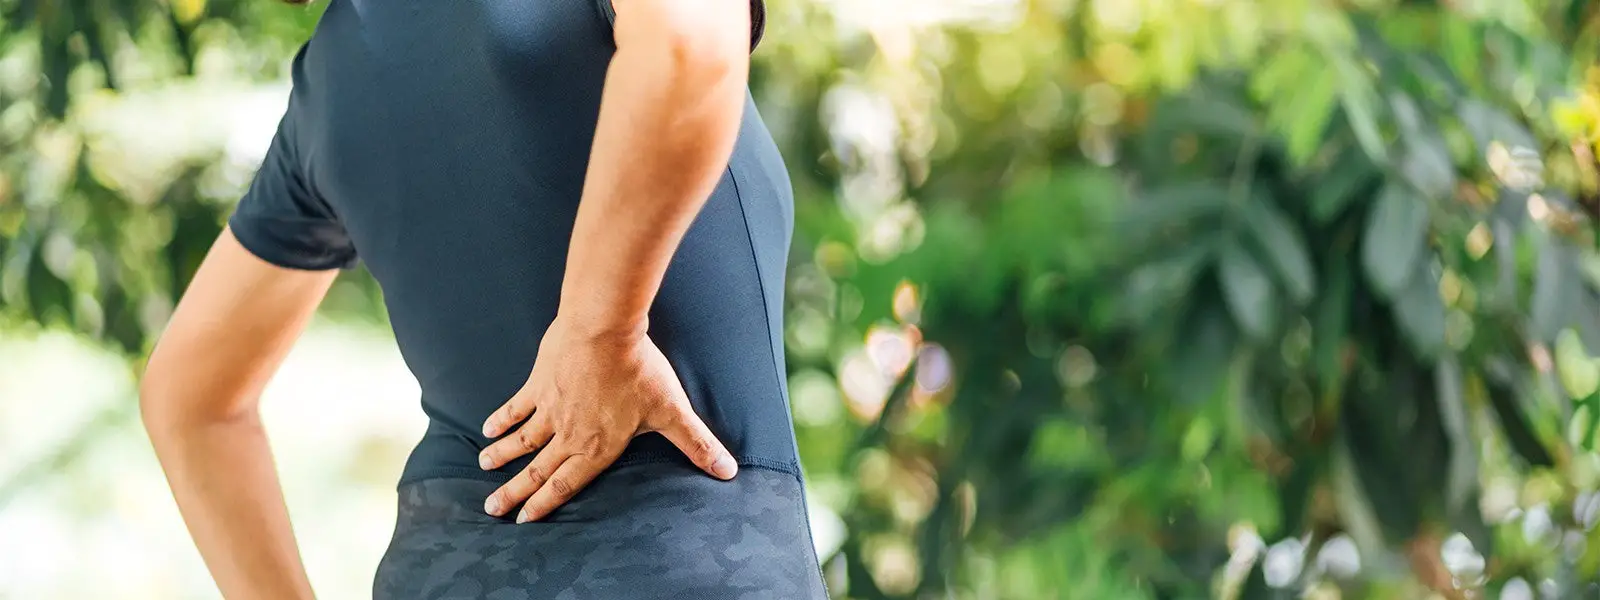 8 Exercises to Relieve Back Pain